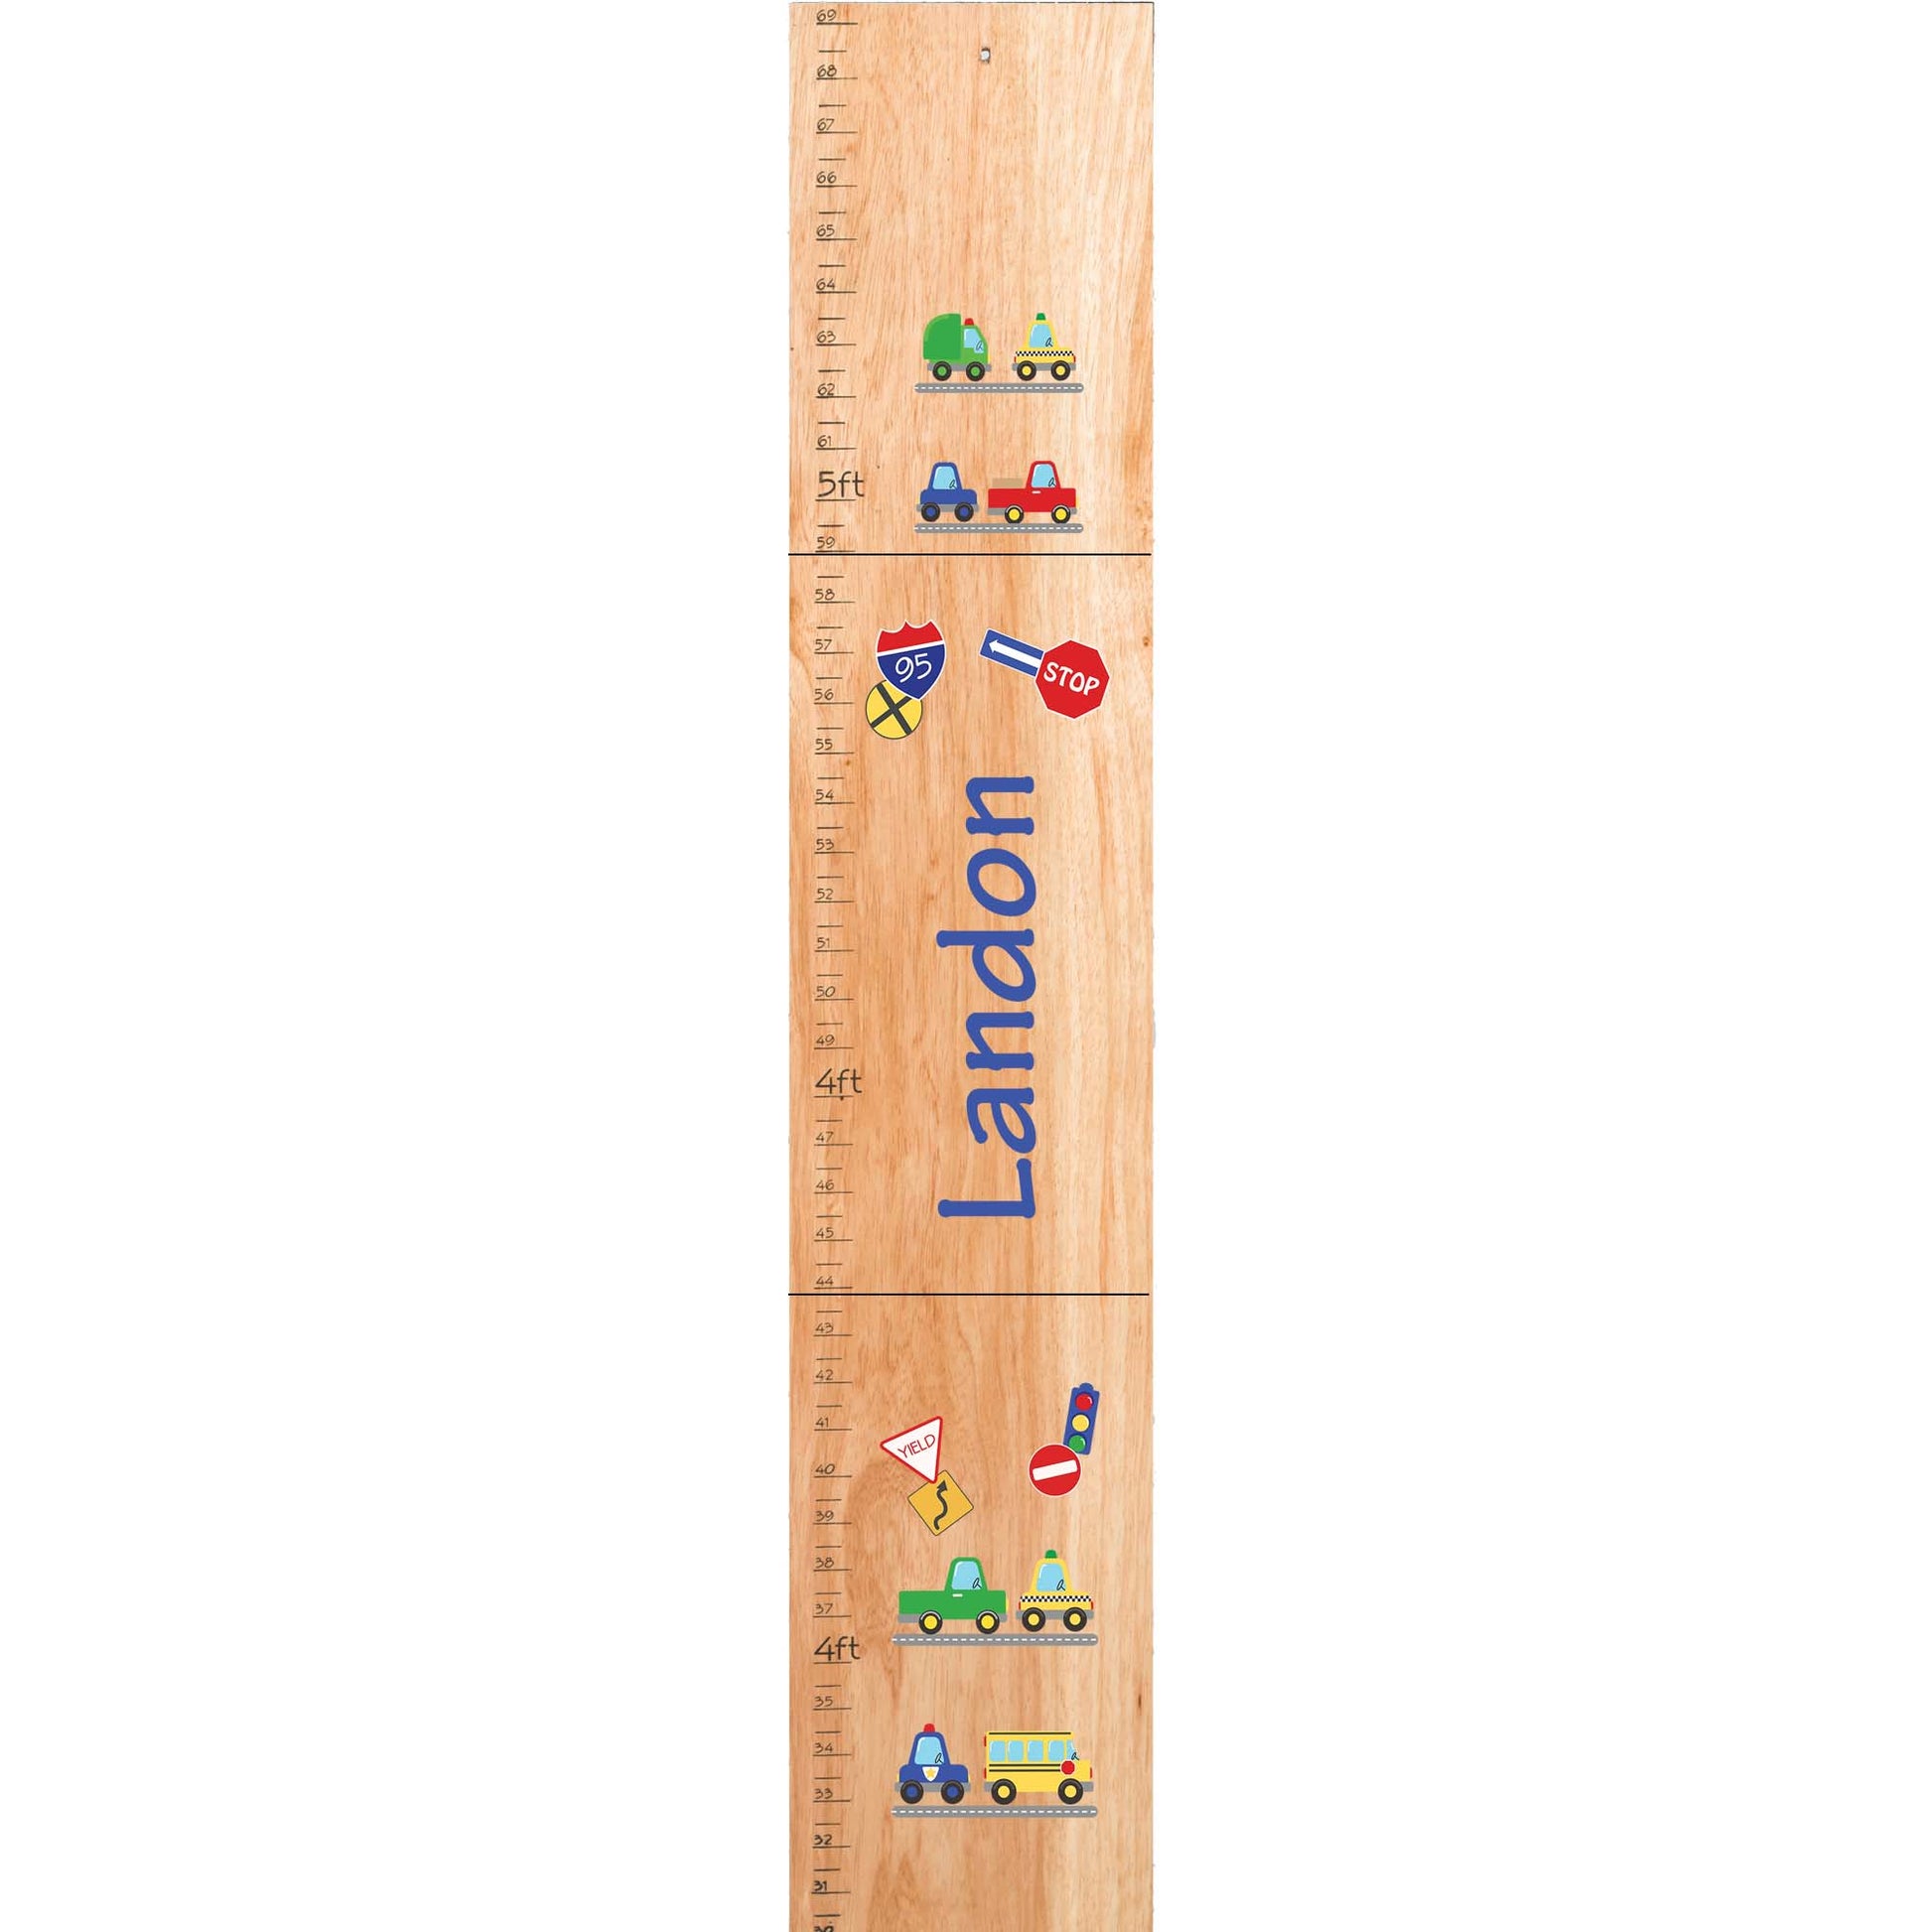 Personalized Natural Growth Chart With Cars And Trucks Design